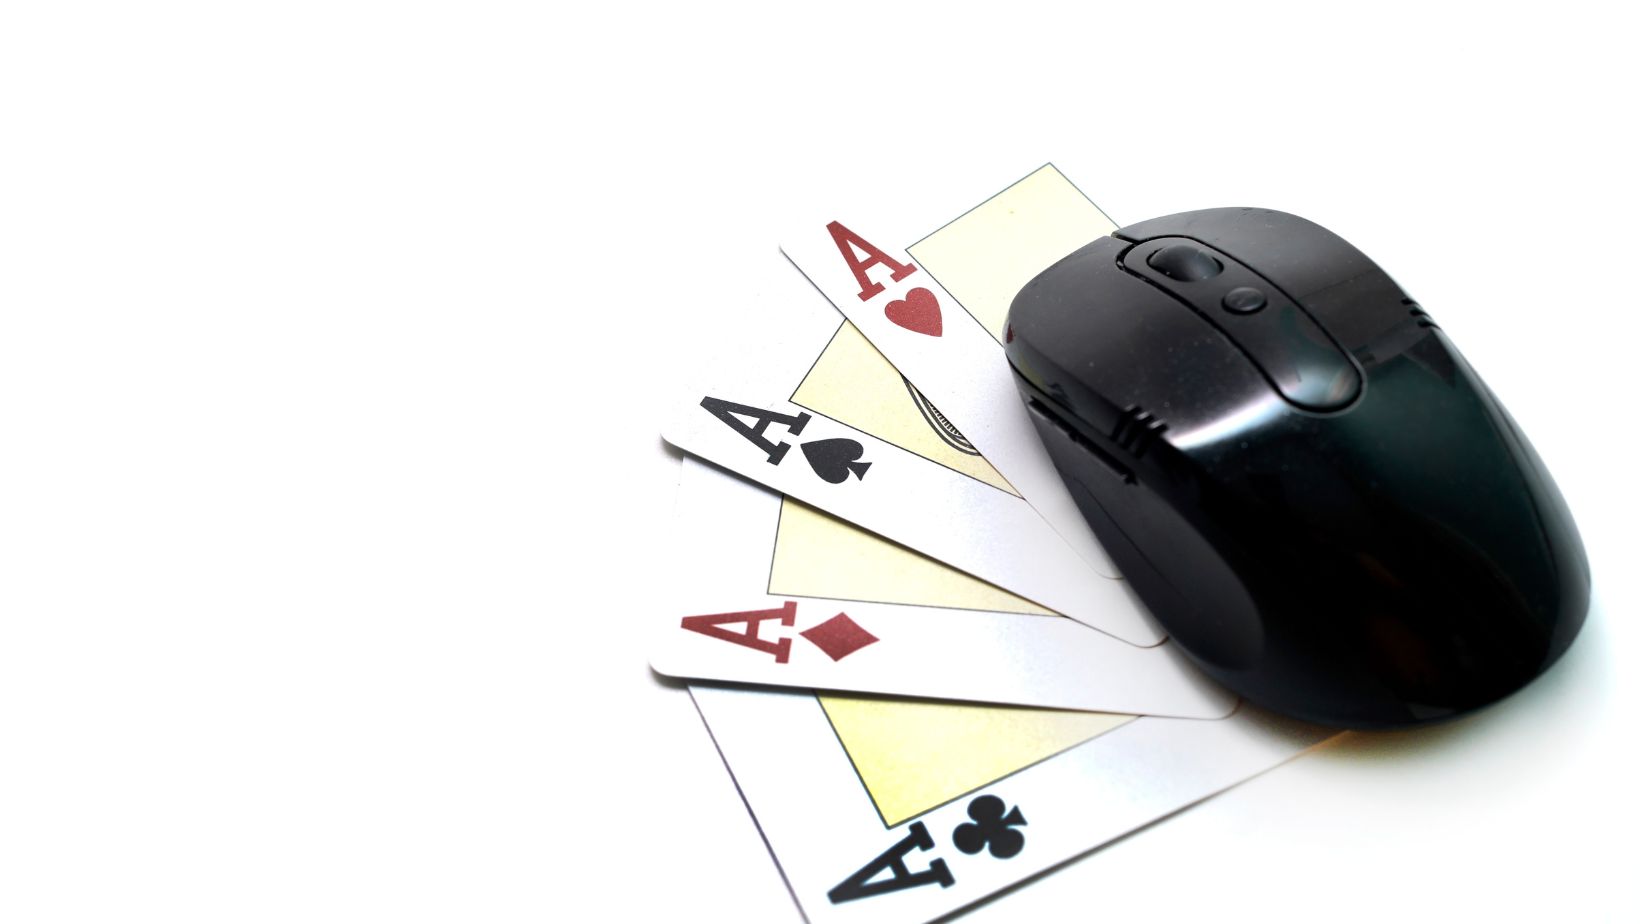 5 Fun Facts About Online Casinos You'll Find Interesting